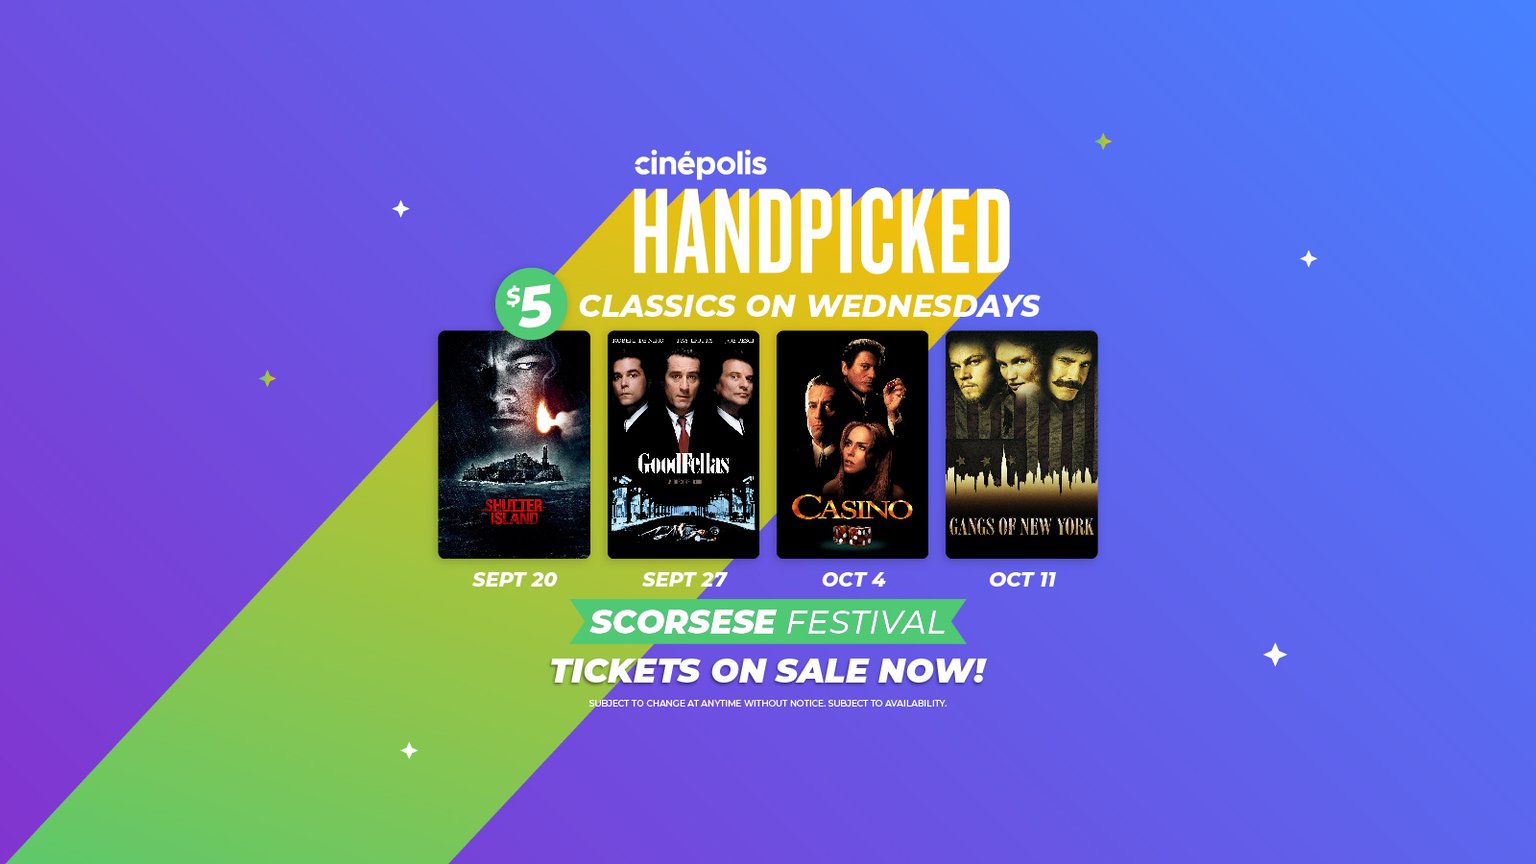 Handpicked Classics for $5 at Cinepolis